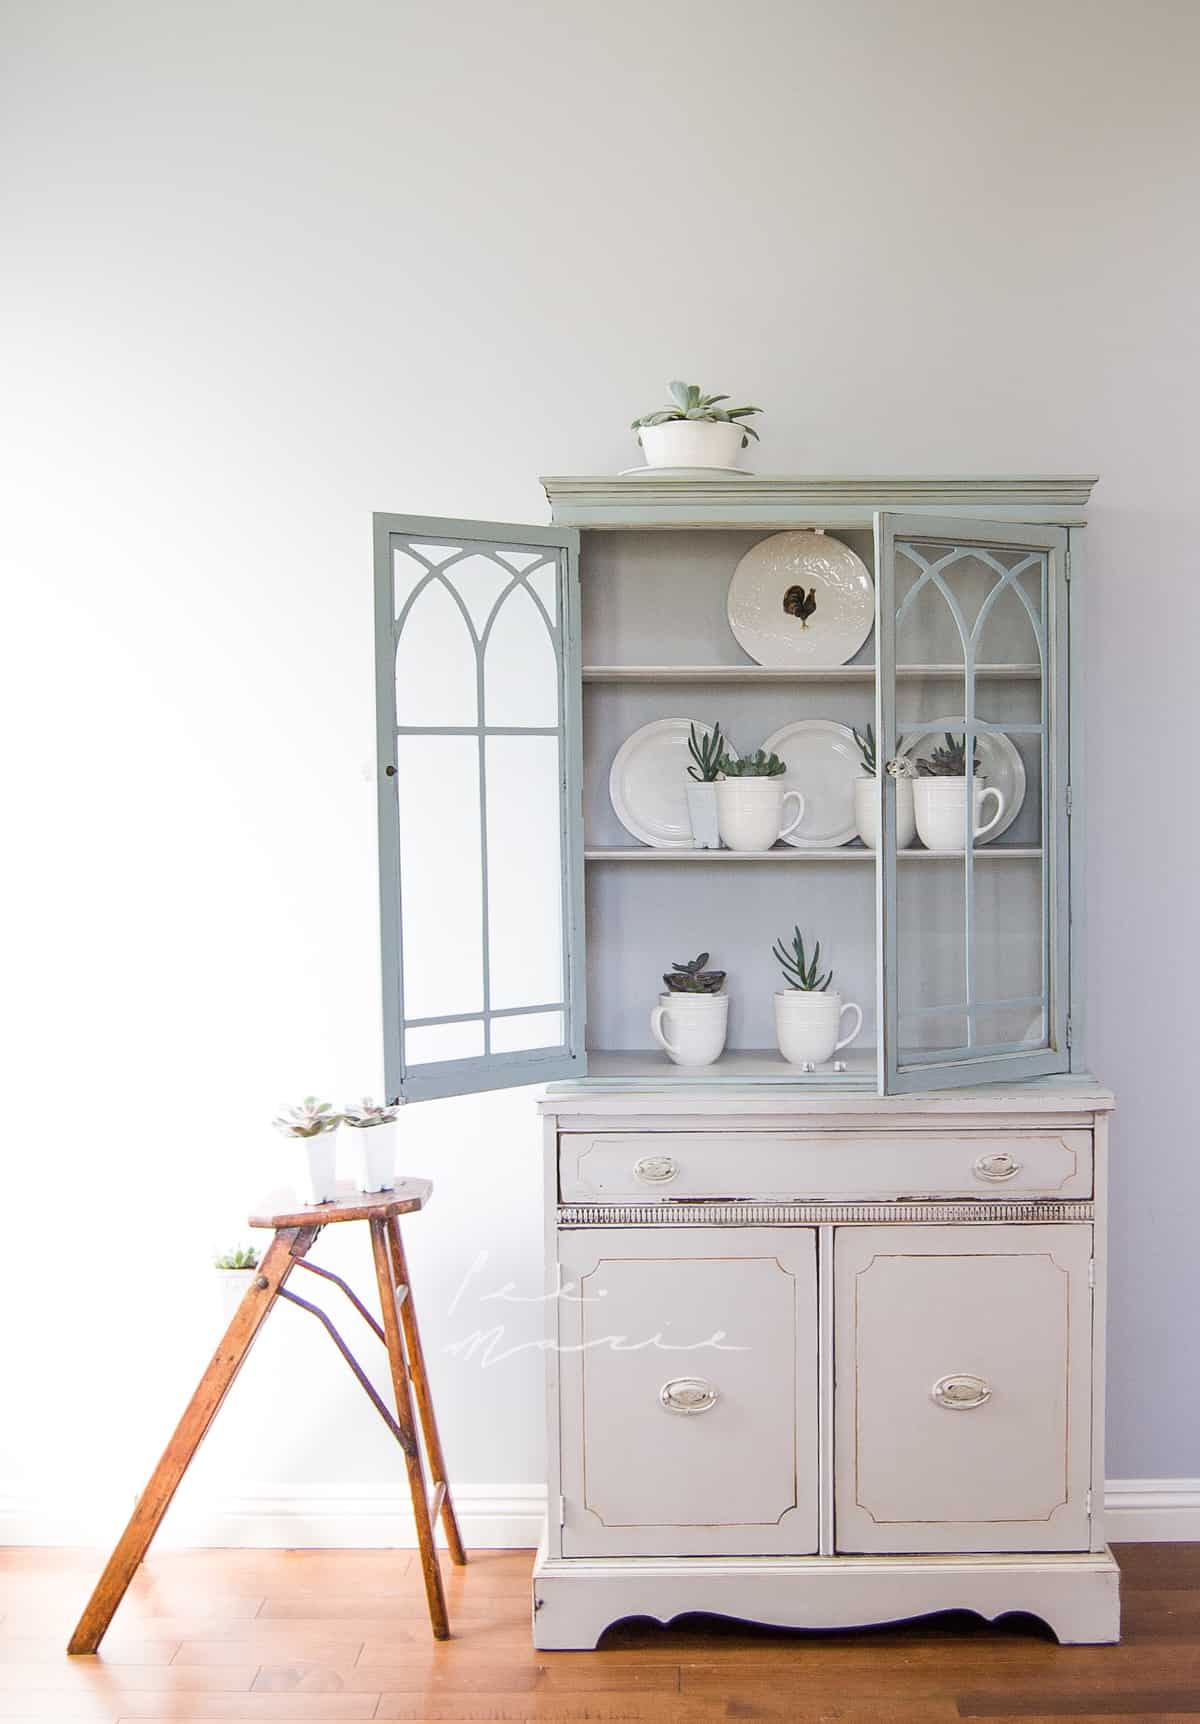 A Touch Of Elegance #DIY #furniturepaint #paintedfurniture #homedecor #hutch #diningroom #grey #chalkpaint #rustic #farmhouse #neutral #countrychicpaint - blog.countrychicpaint.com